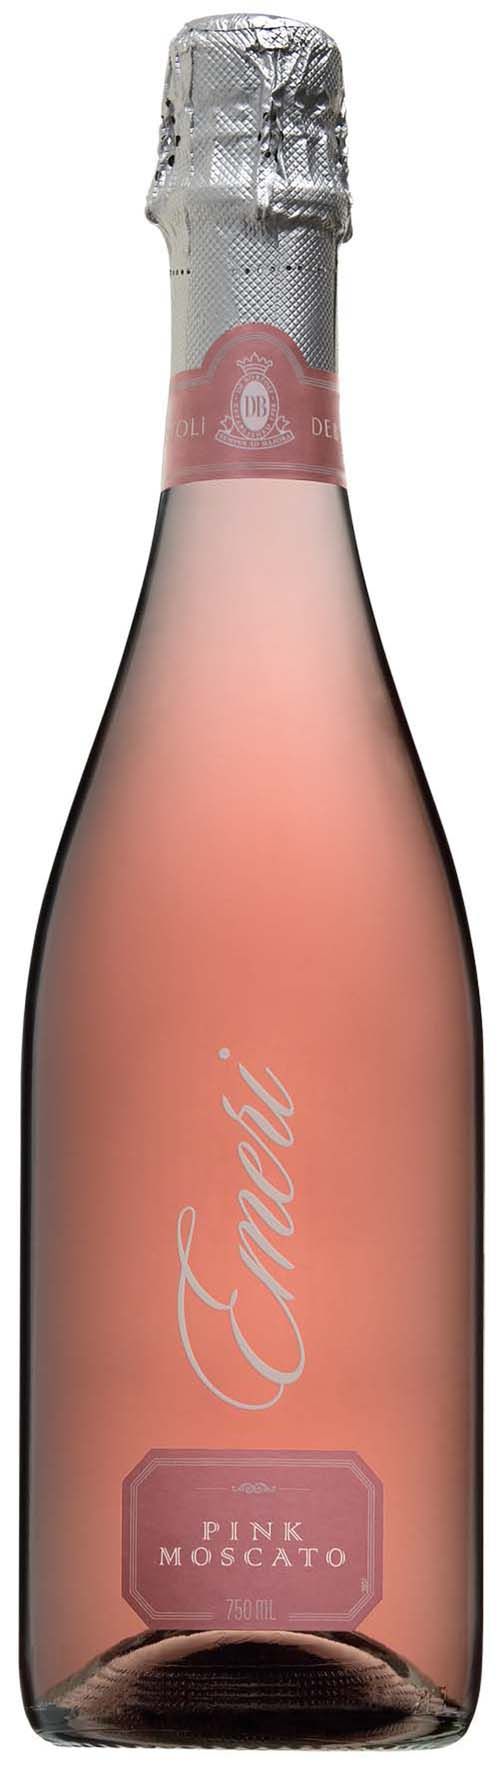 Pink Moscato…yum